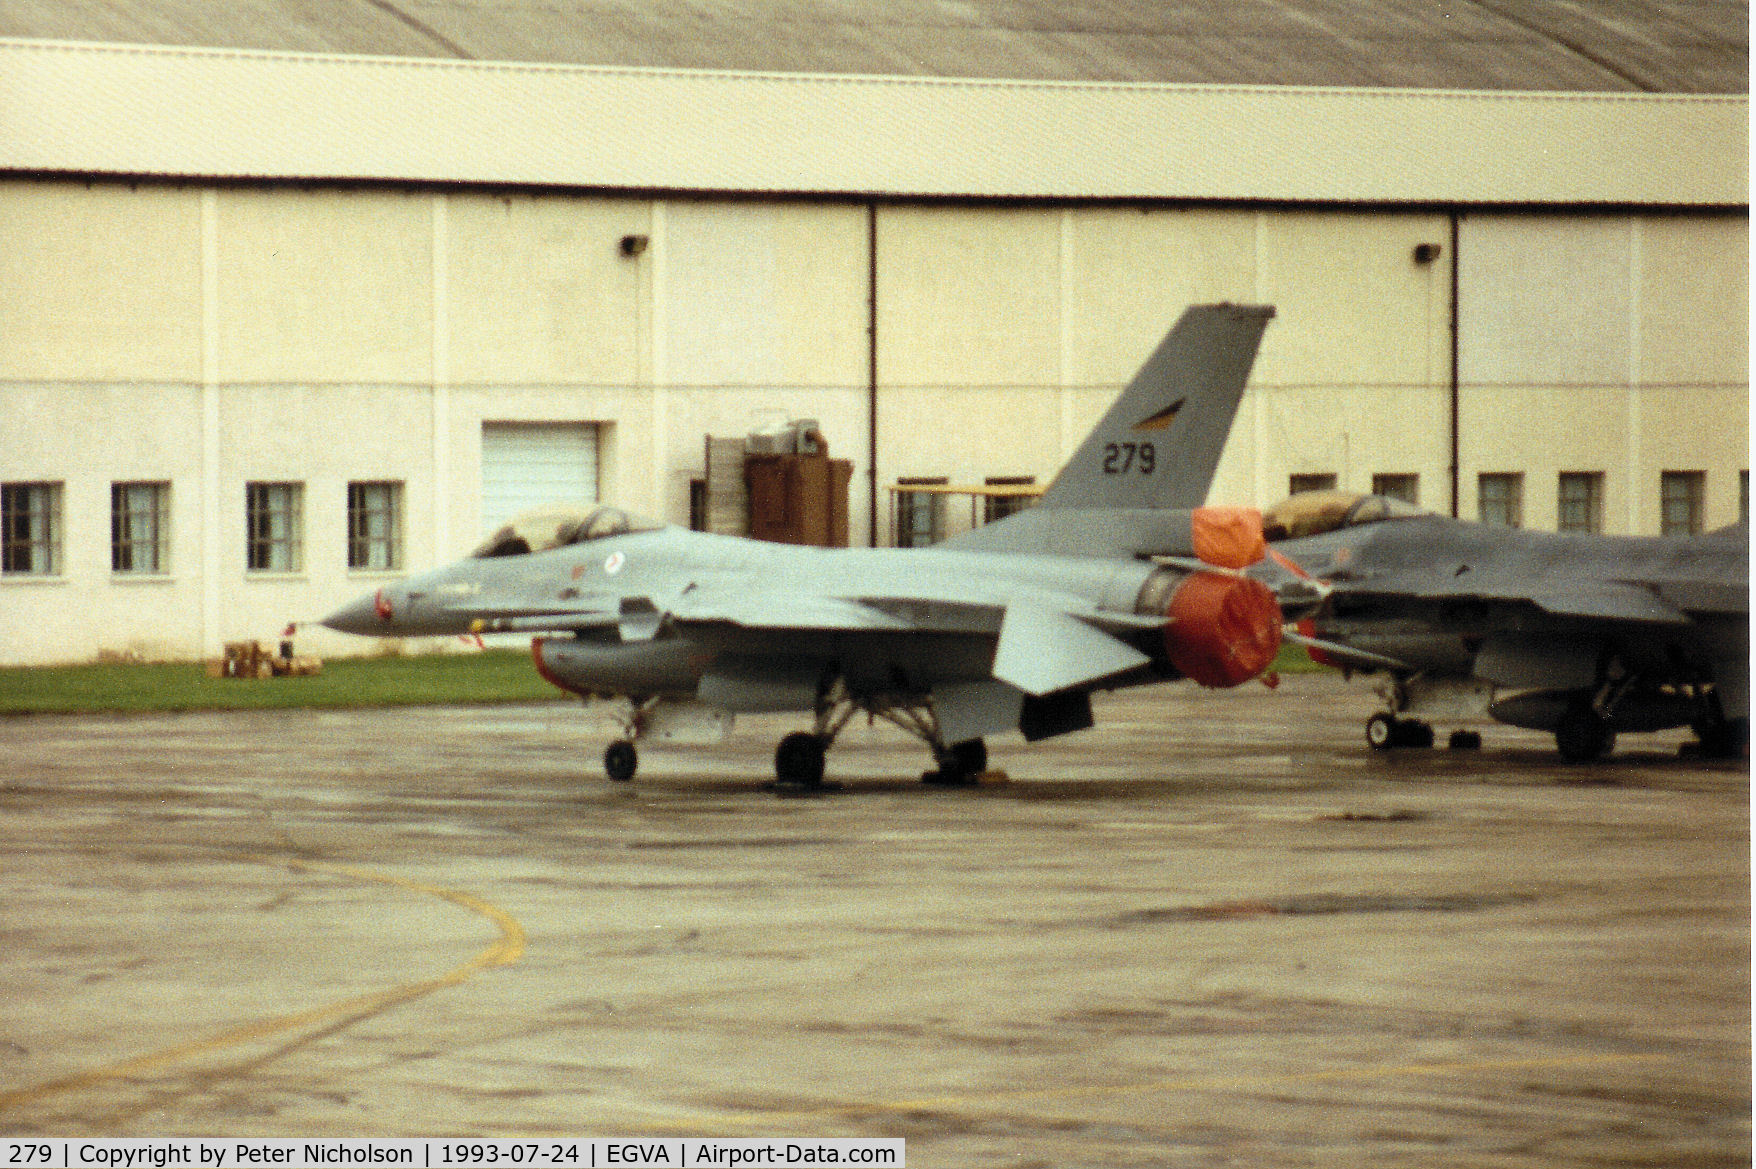 279, 1980 Fokker F-16A Fighting Falcon C/N 6K-8, F-16A Falcon of 332 Skv Royal Norwegian Air Force on the flight-line at the 1993 Intnl Air Tattoo at RAF Fairford.